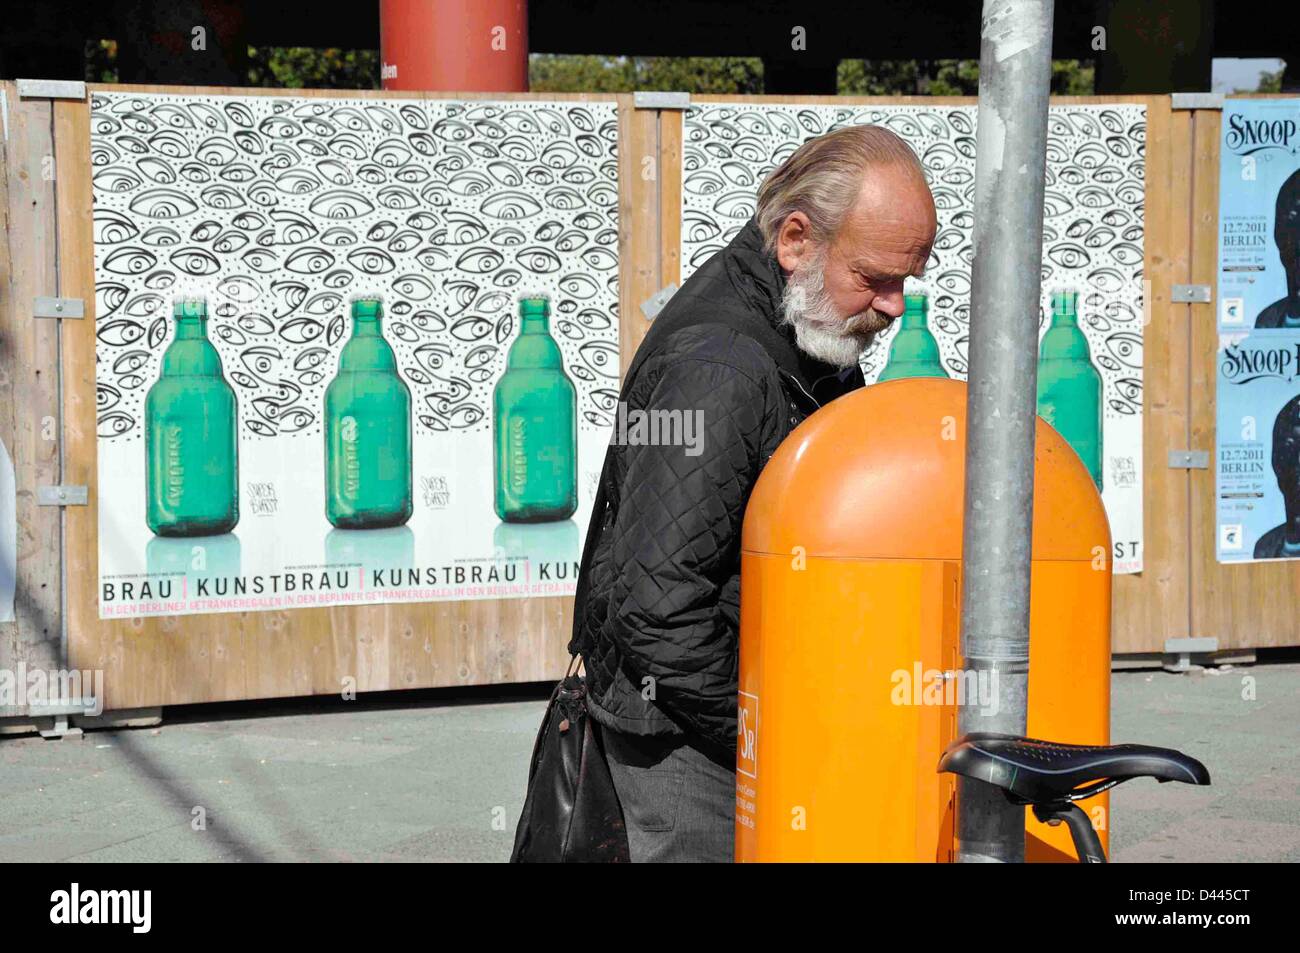 An old man searches for deposit bottles and recycle products in an orange trash bin of the waste management company Berliner Stadtreinigungsbetriebe (BSR) in Berlin, Germany, 24 September 2011. In the background, advertisement for beer bottles with modern design by Veltins brewery is pictured. Fotoarchiv für ZeitgeschichteS.Steinach Stock Photo